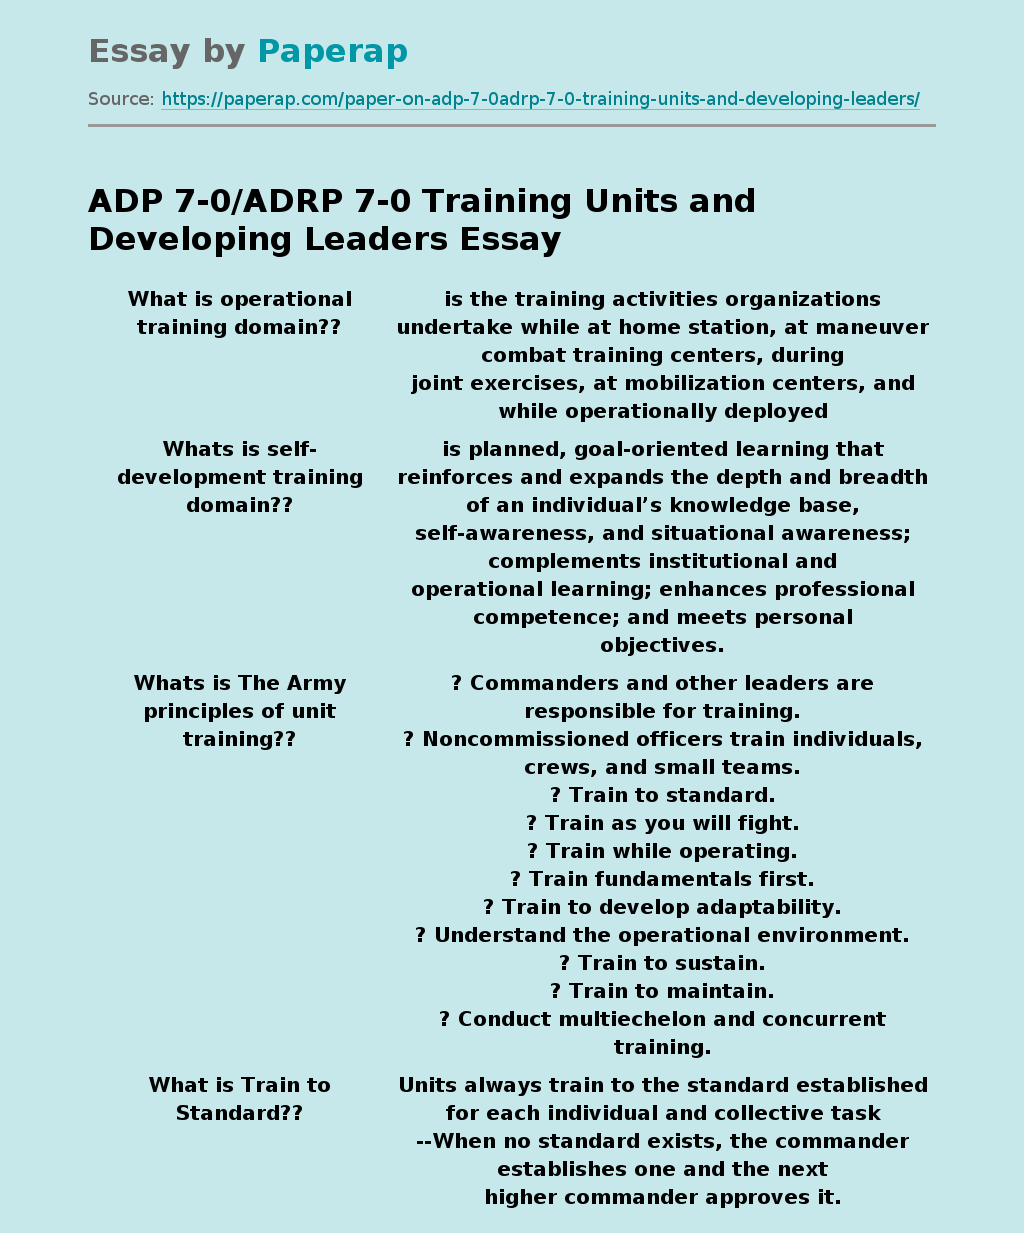 ADP 7-0/ADRP 7-0 Training Units and Developing Leaders